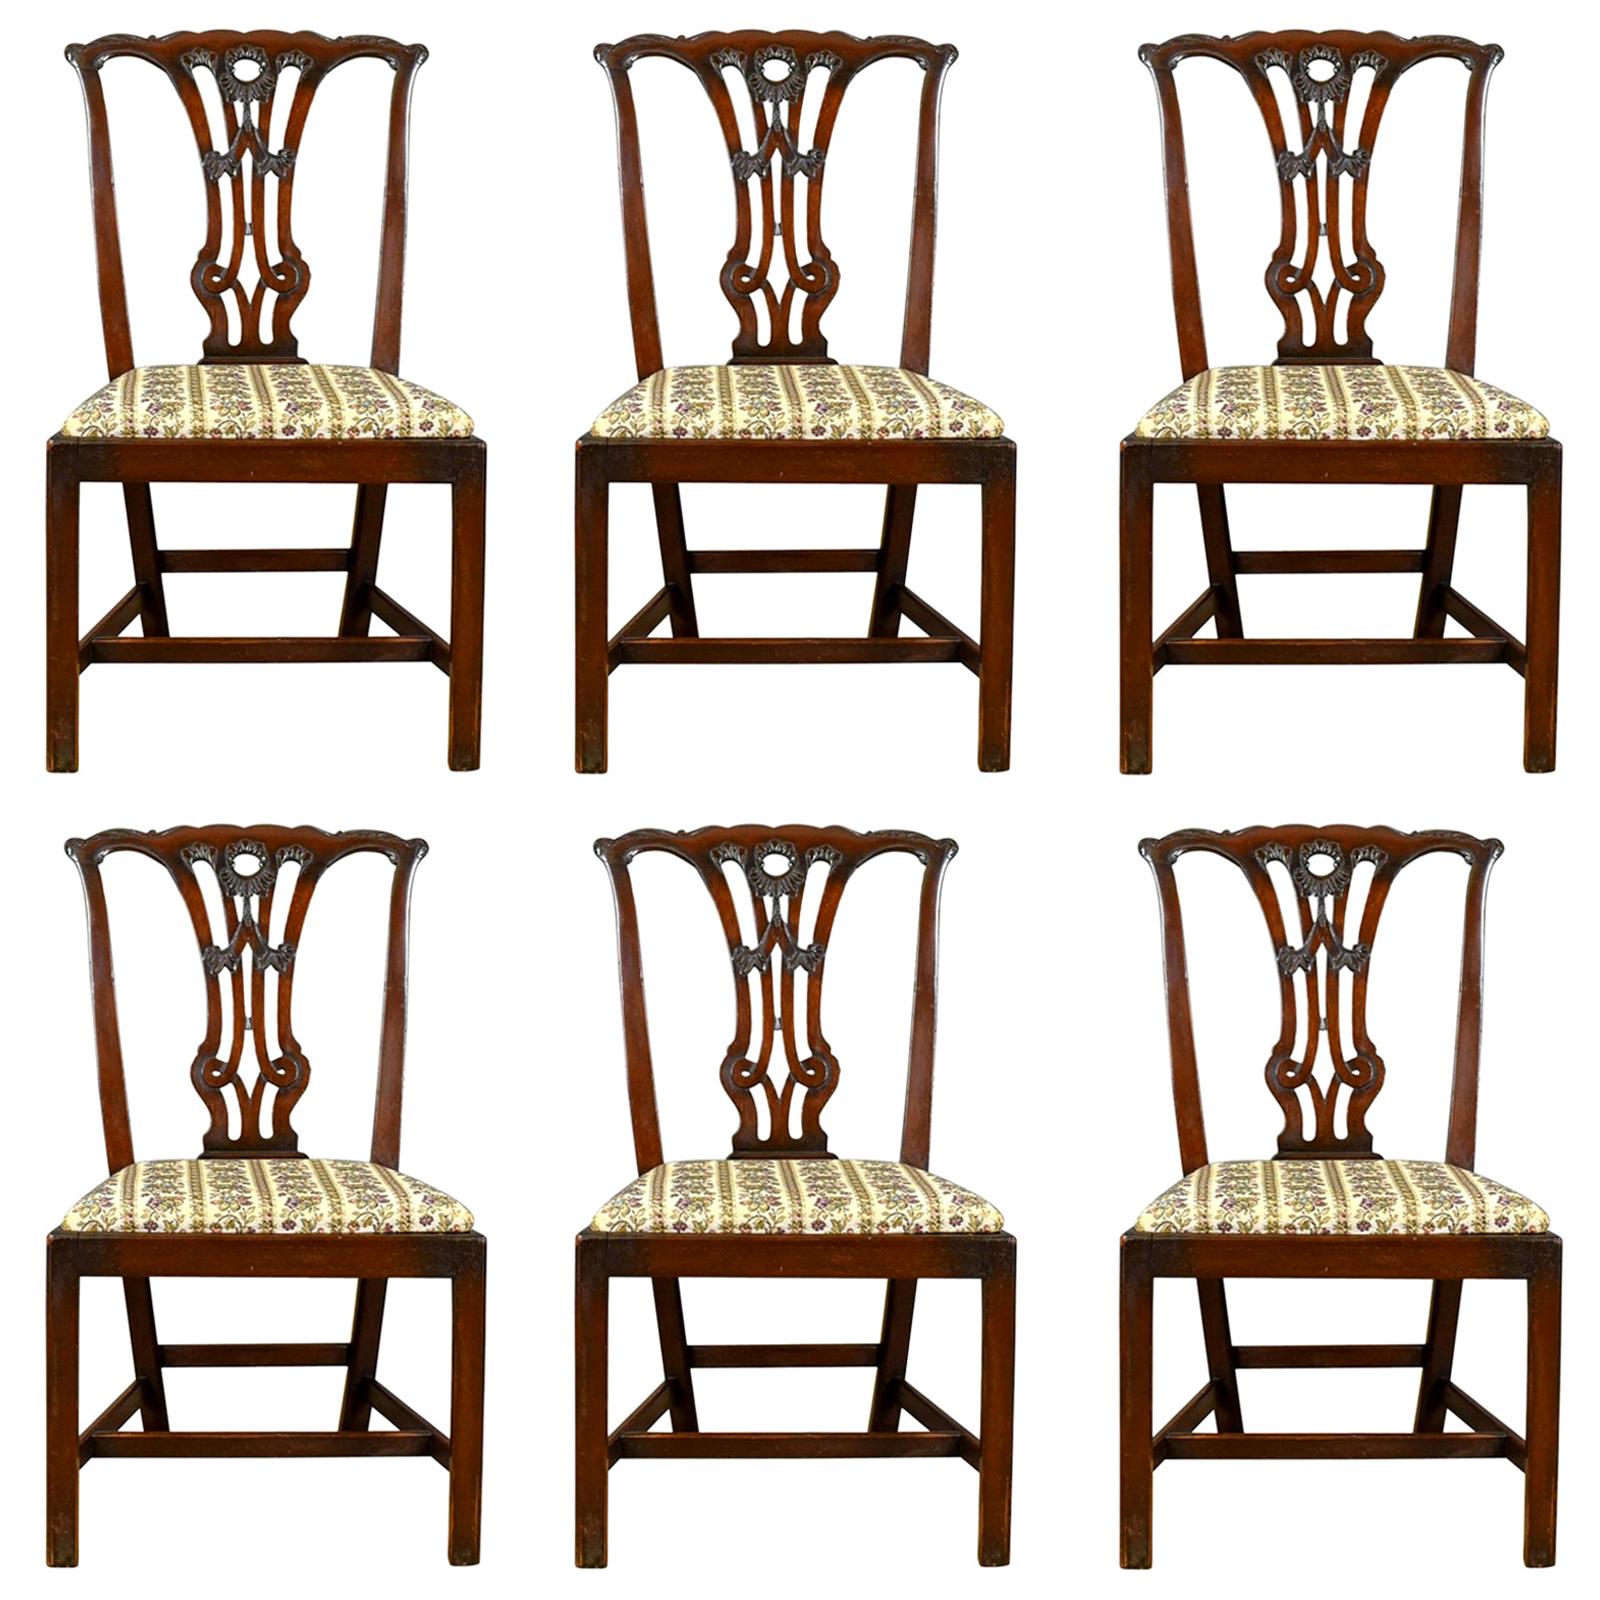 Set of Six Antique Dining Chairs English Victorian Chippendale Taste, circa 1900